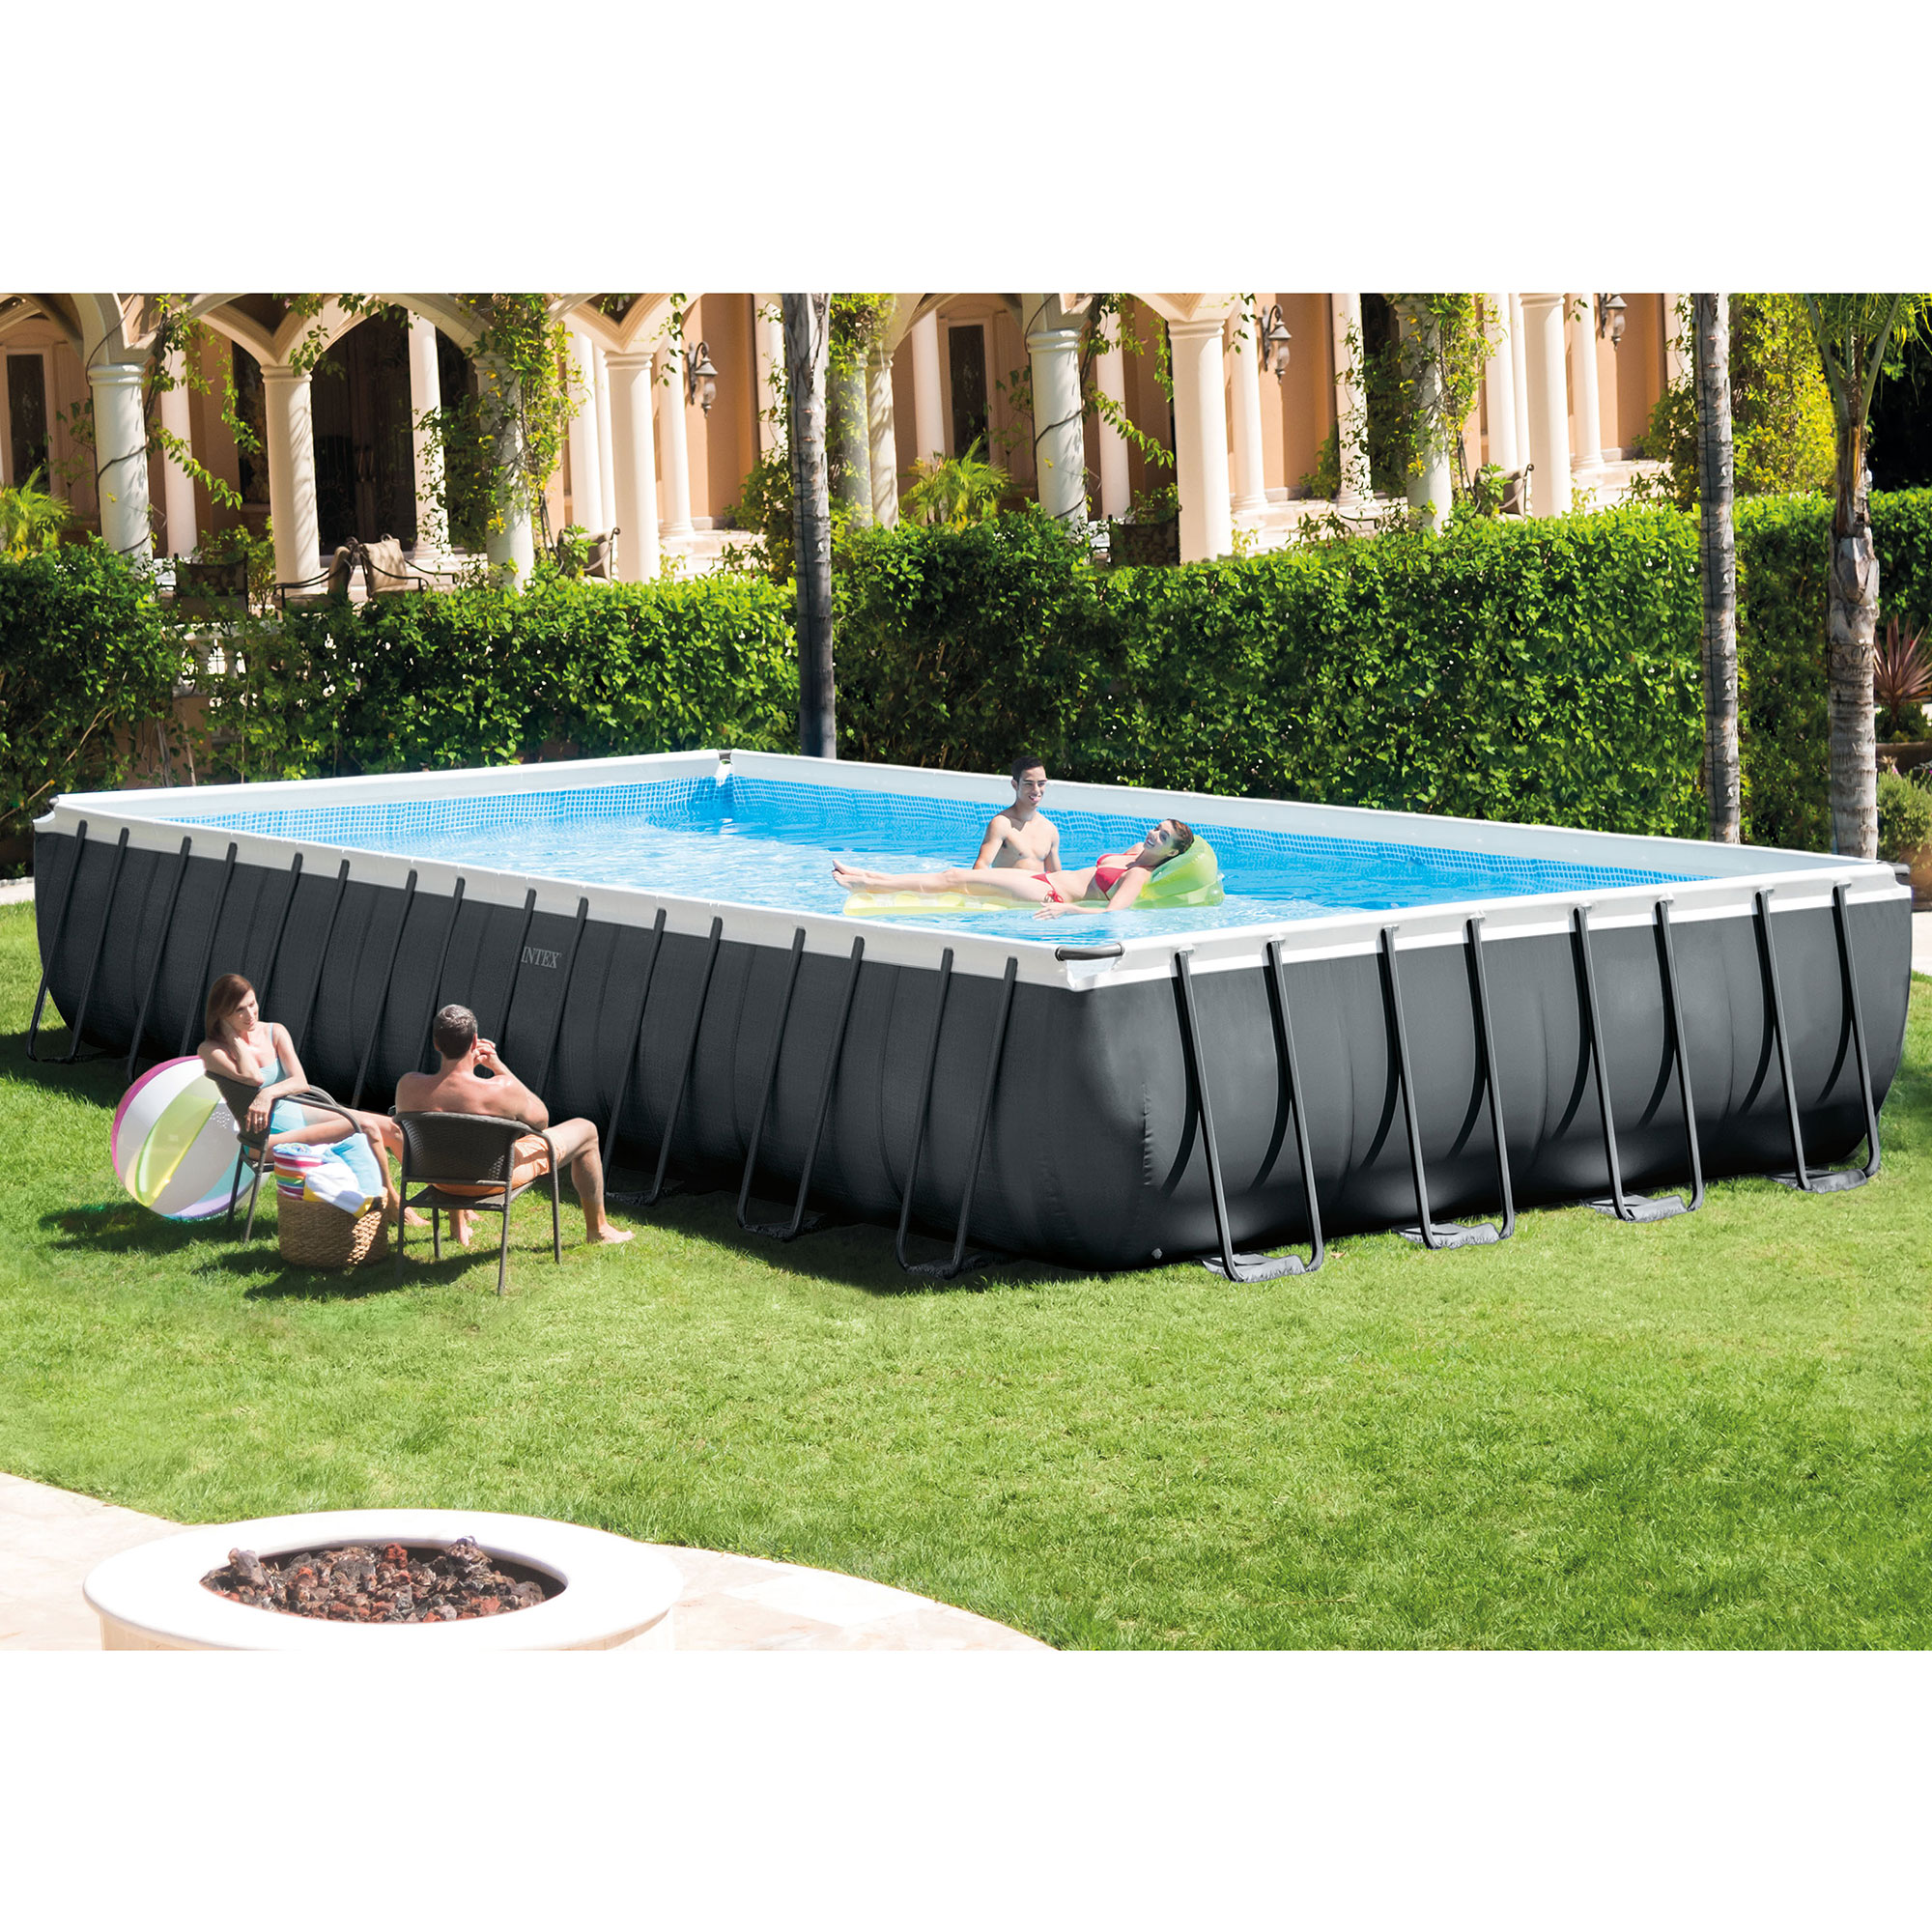 Modern Intex Ultra Xtr Rectangular Above Ground Frame Swimming Pool with Simple Decor